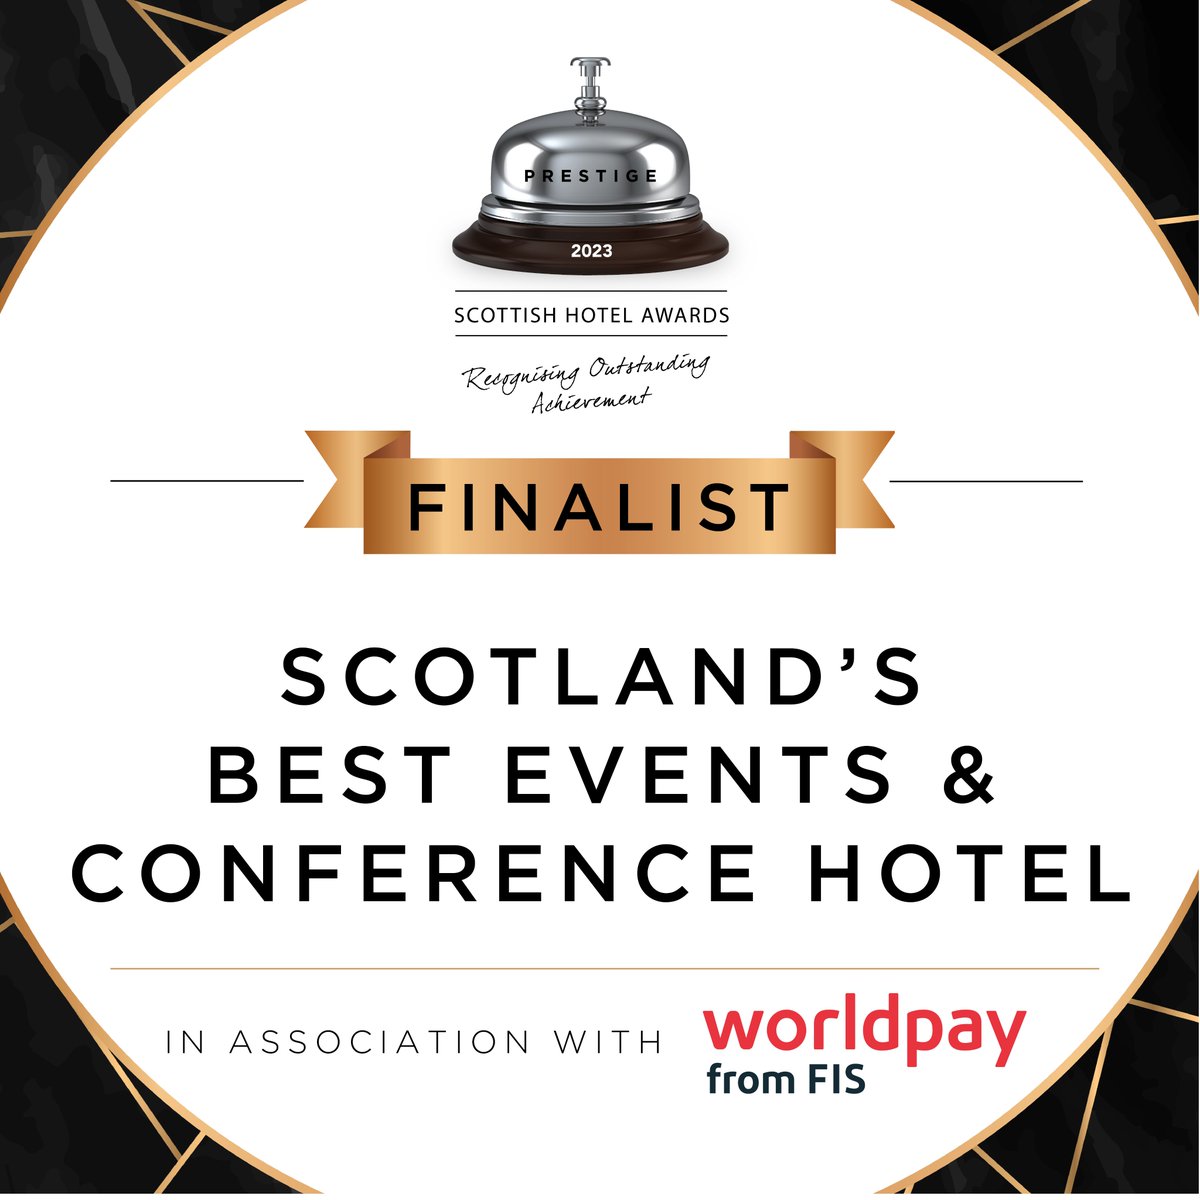 We are absolutely delighted to have been shortlisted as a finalist in the Prestige Hotel Awards category of Scotland's best events and conference Hotel!  

Thanks to all of our incredible team for making this possible🏆  
#prestigeawards #eventprofs #conference #eventindustry